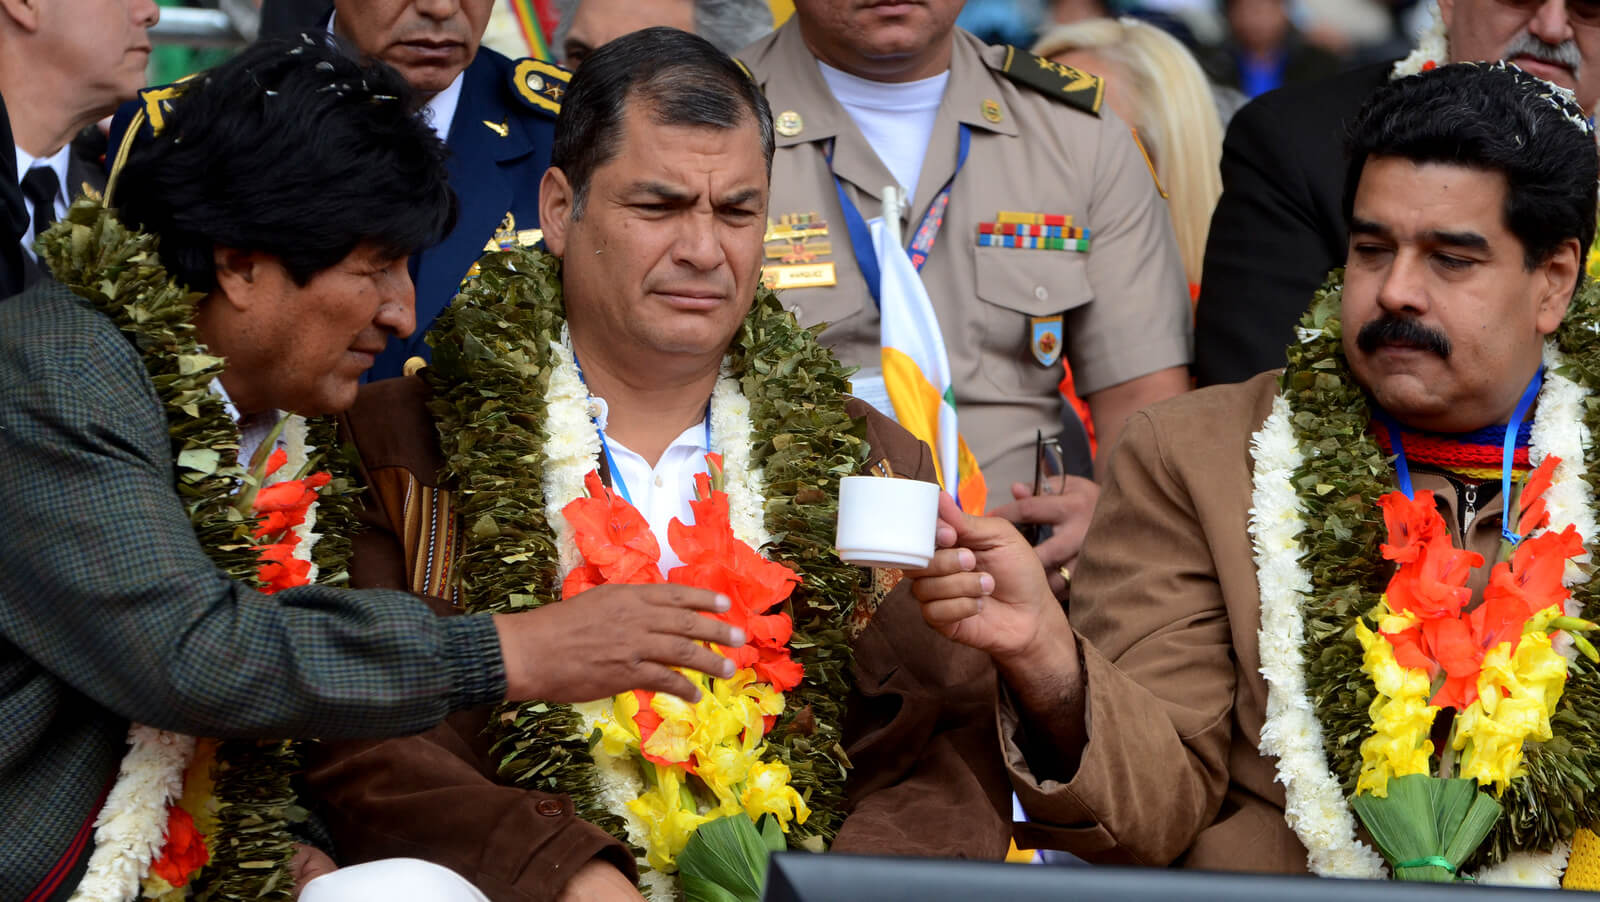 Bolivia's President Evo Morales, left, hands a cup of tea to Venezuela's Prsident Nicolas Maduro, right, as Ecuador's President Rafael Correa, center, looks on during the welcoming ceremony for delegates of the G77 + China Summit in Santa Cruz, Bolivia, June 14, 2014. (AP Photo)